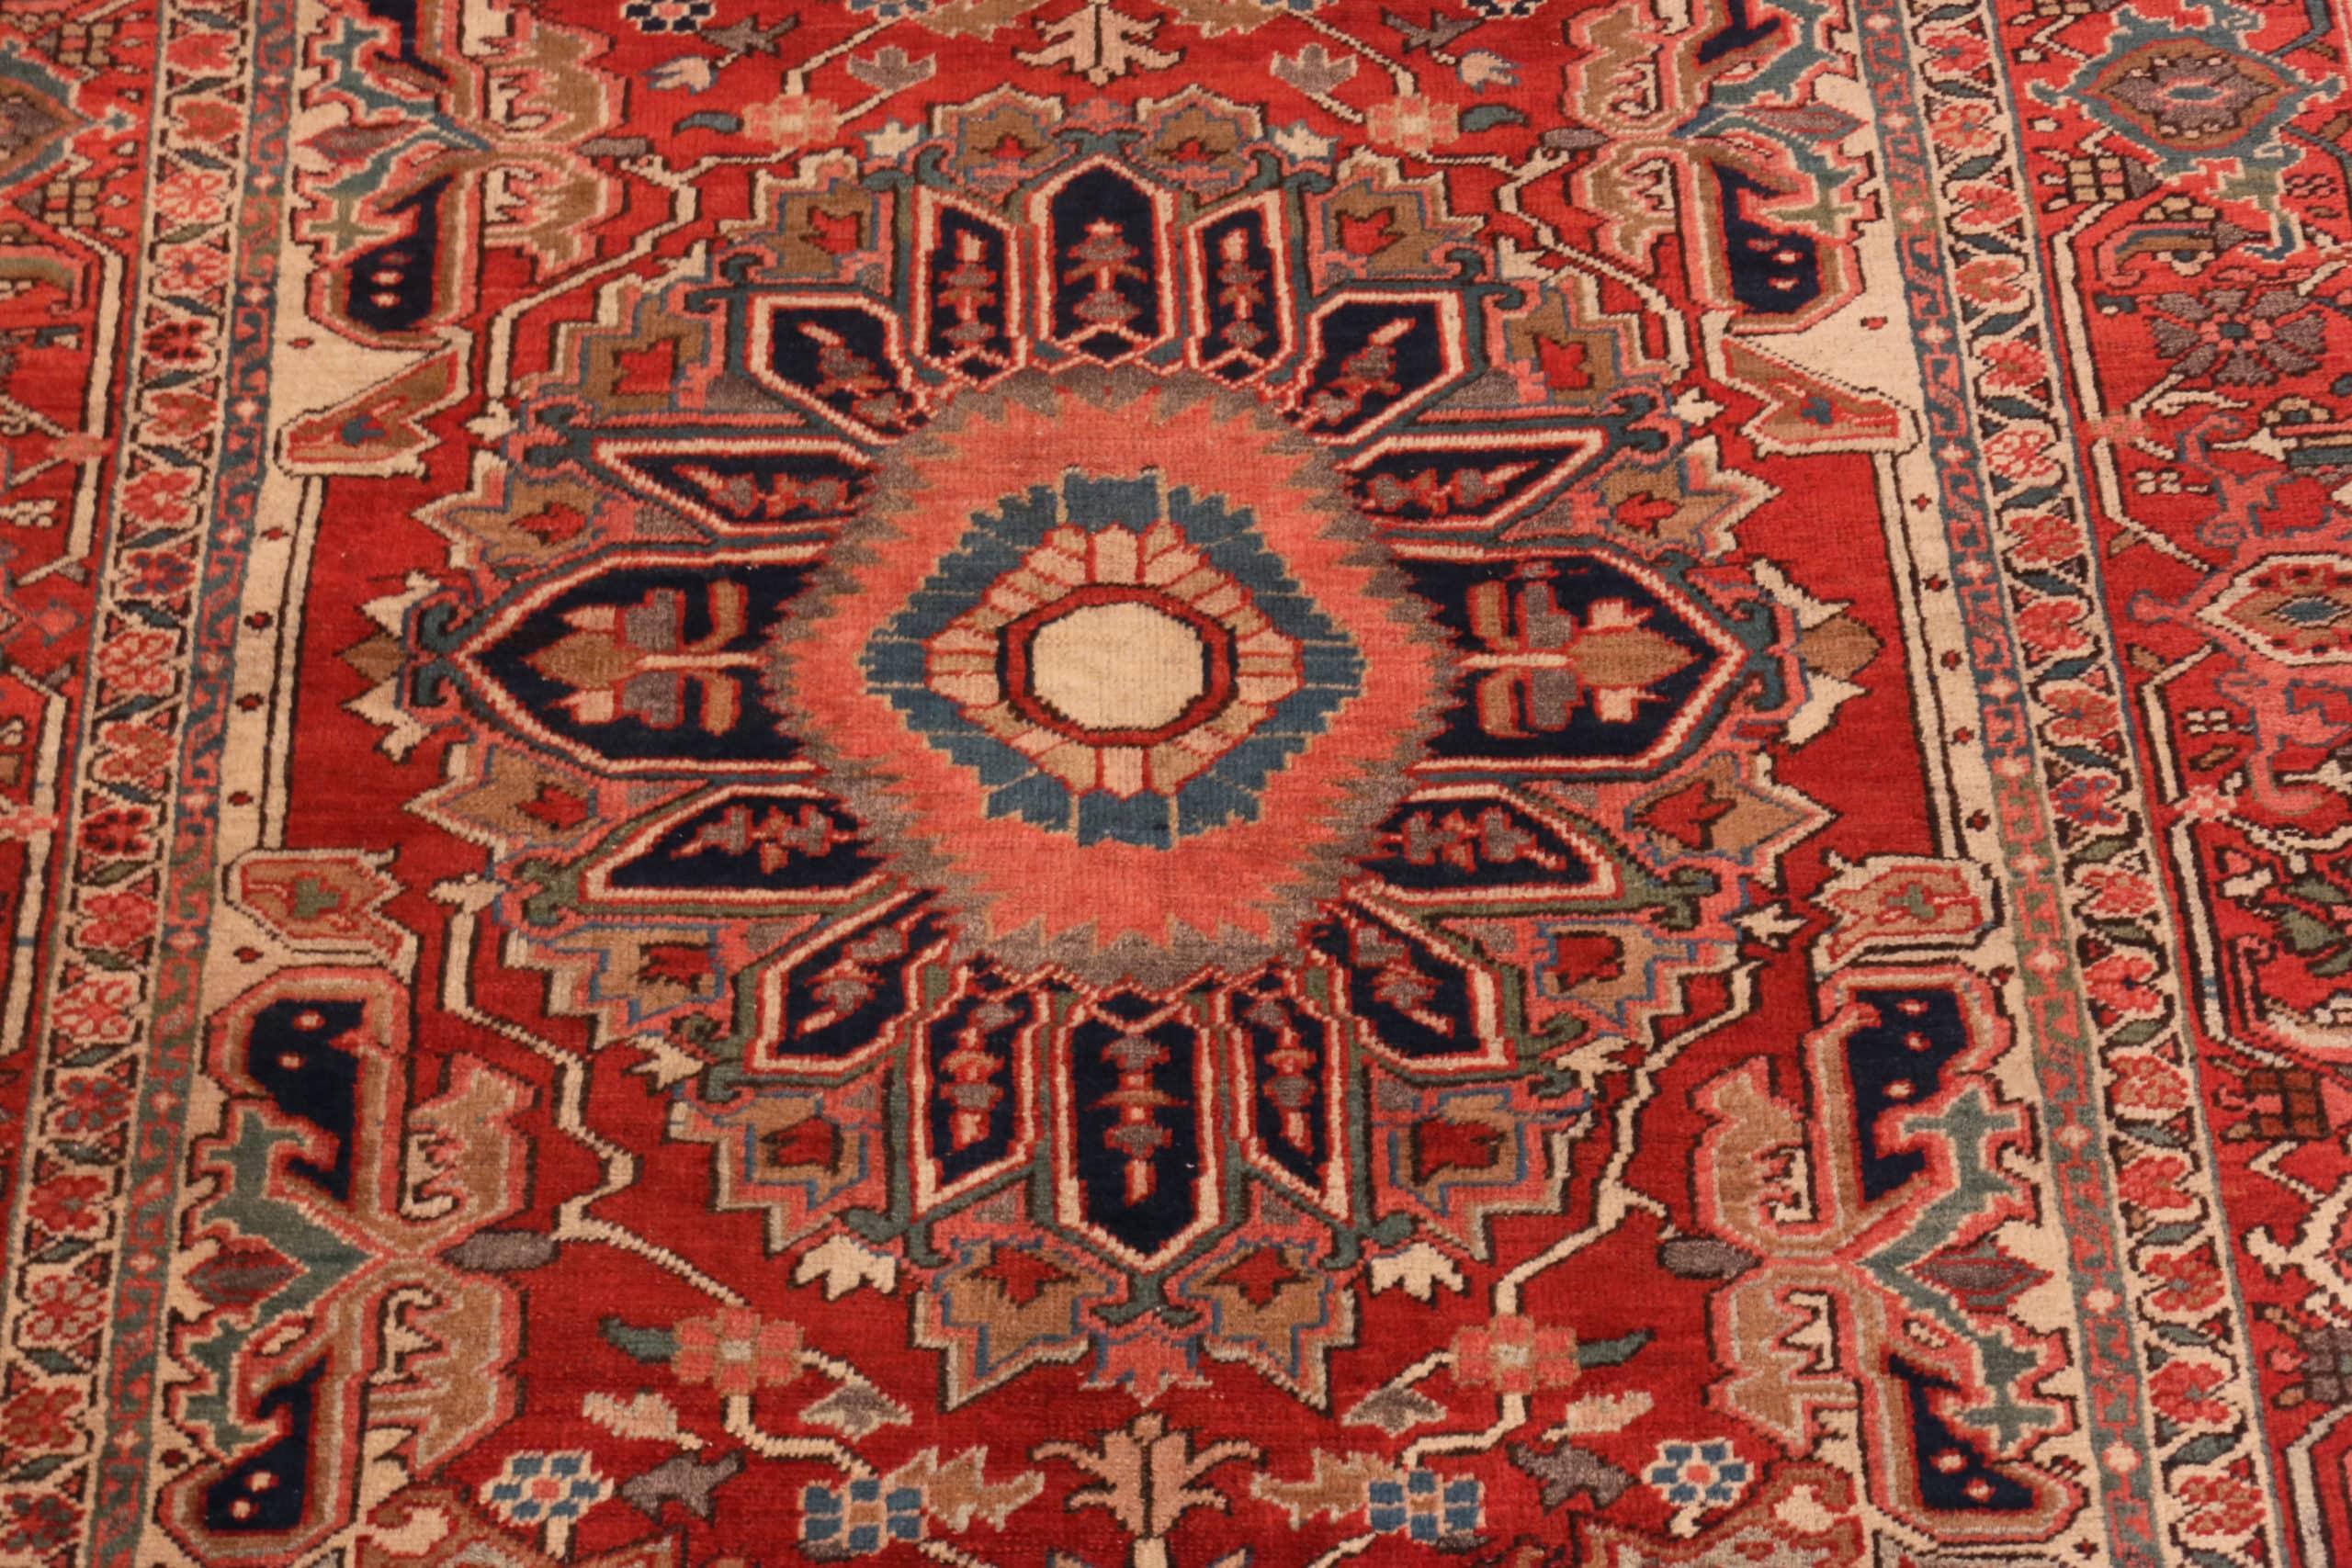 Beautiful Small Vibrant Geometric Antique Persian Heriz Rug, Country of Origin / rug type: Persian Rugs, Circa date: 1920. Size: 4 ft 10 in x 5 ft 9 in (1.47 m x 1.75 m)
   